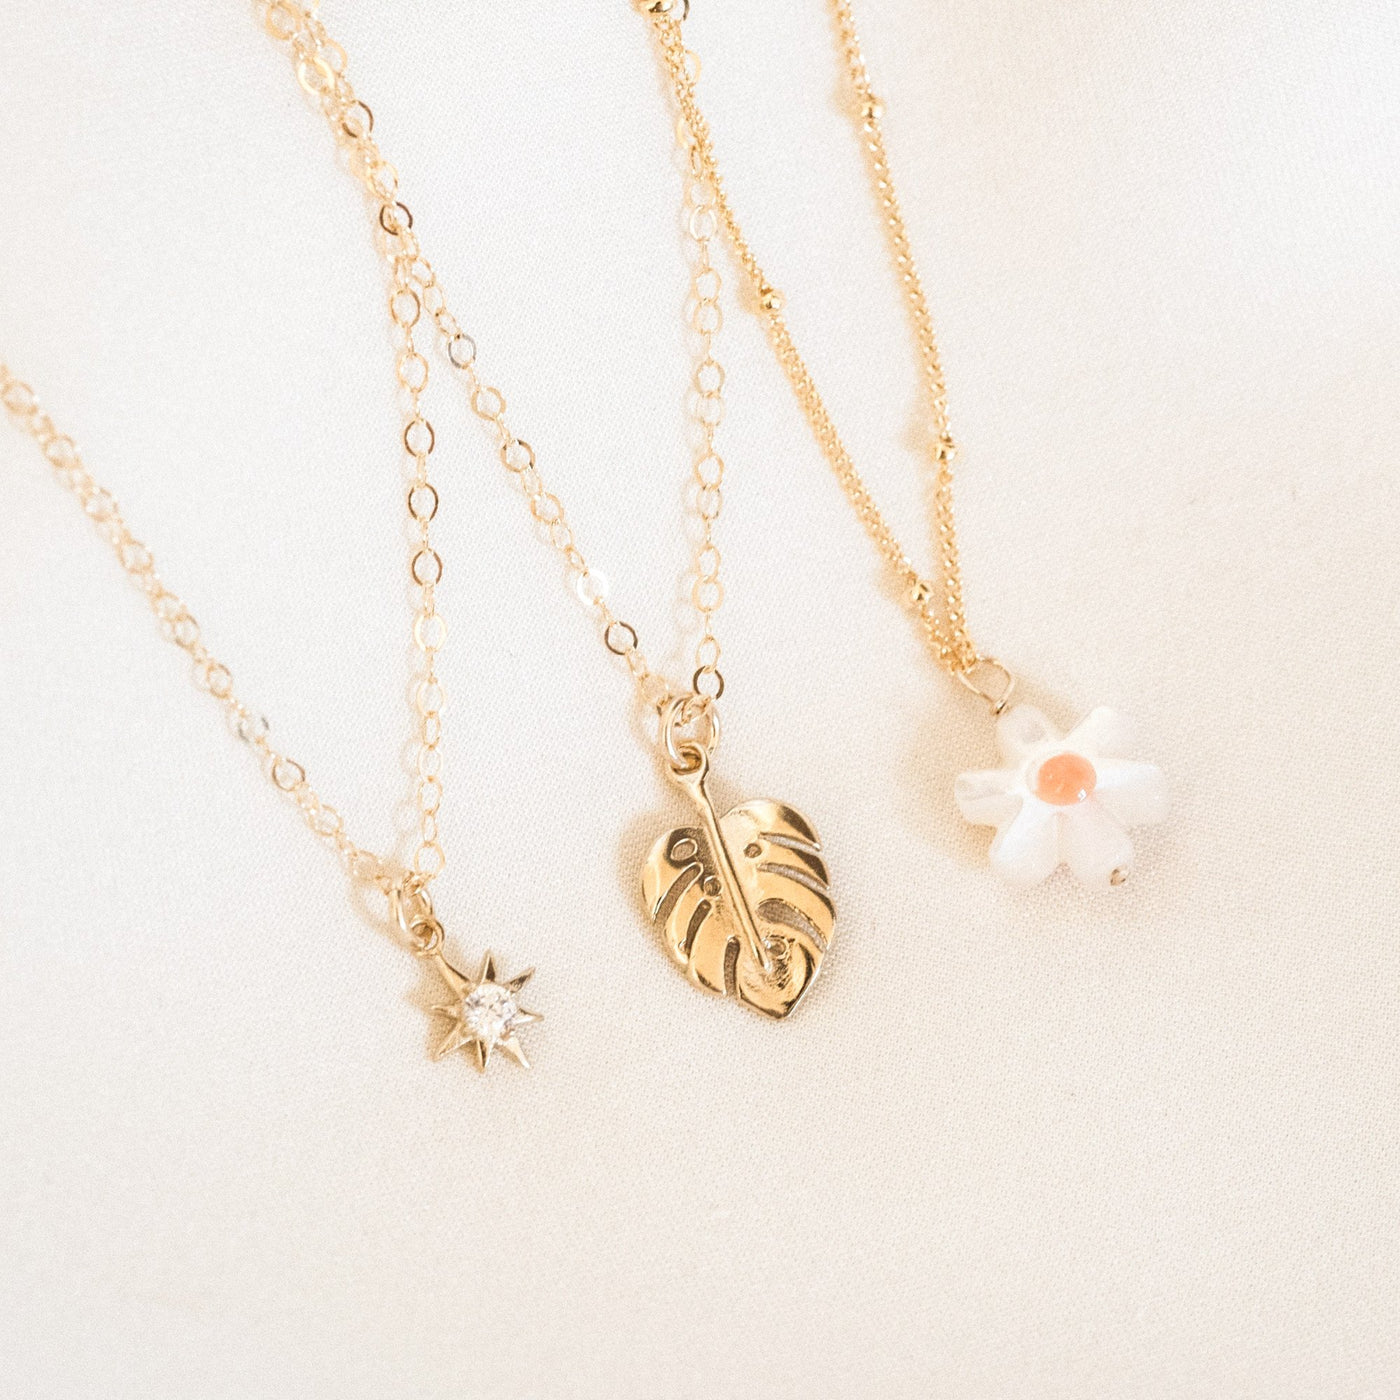 Monstera Leaf Necklace by Simple & Dainty Jewelry